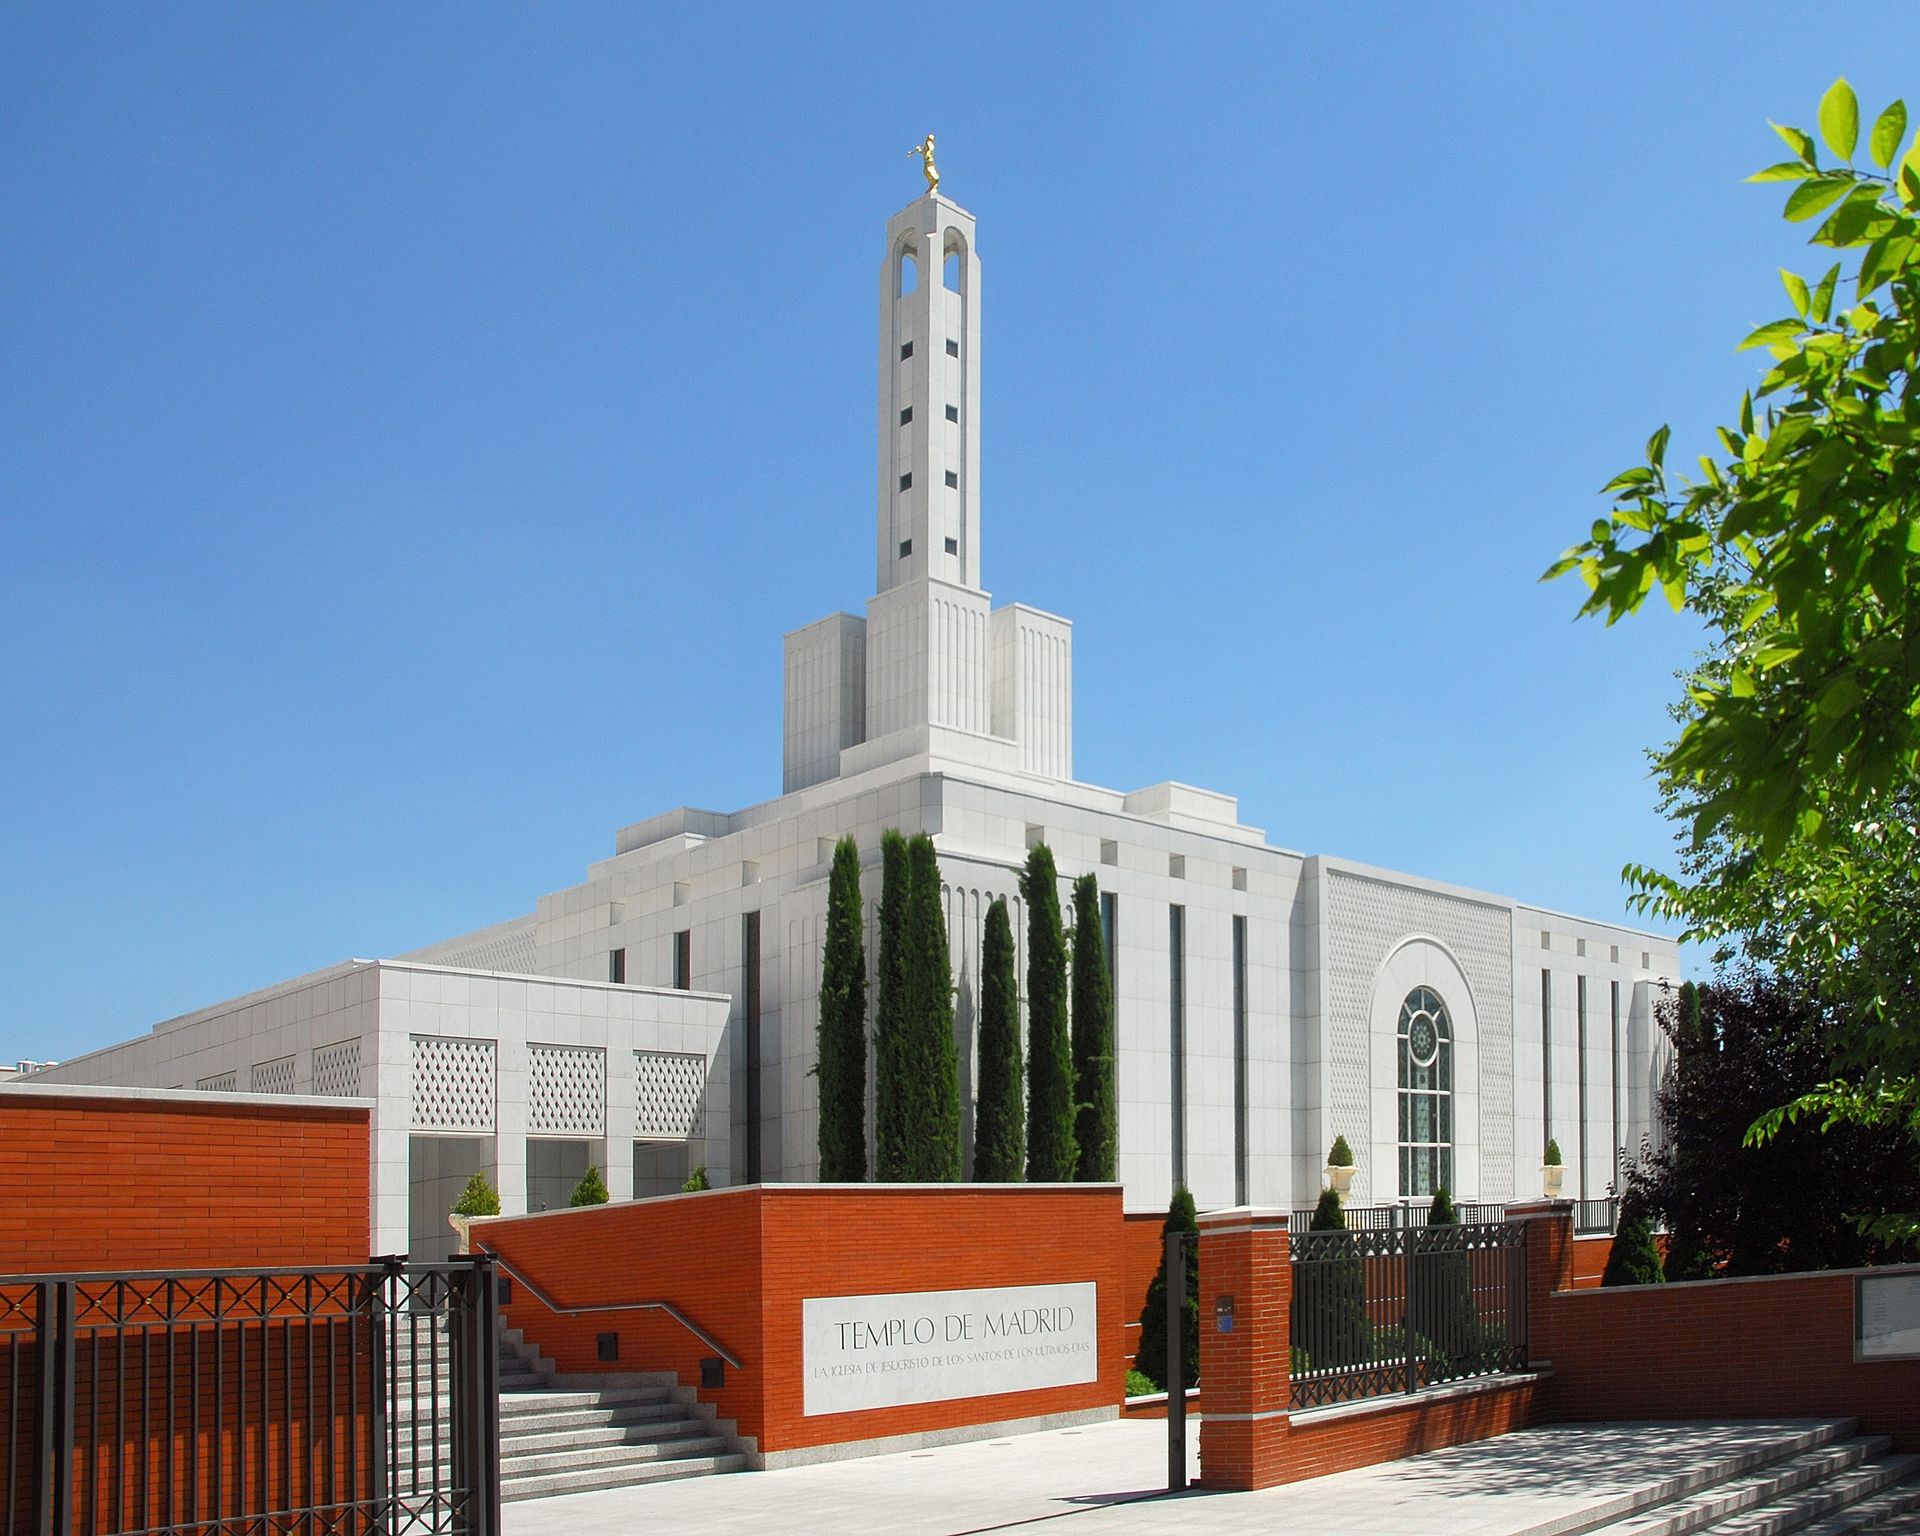 The Madrid Spain Temple name sign, including scenery and the exterior of the temple.